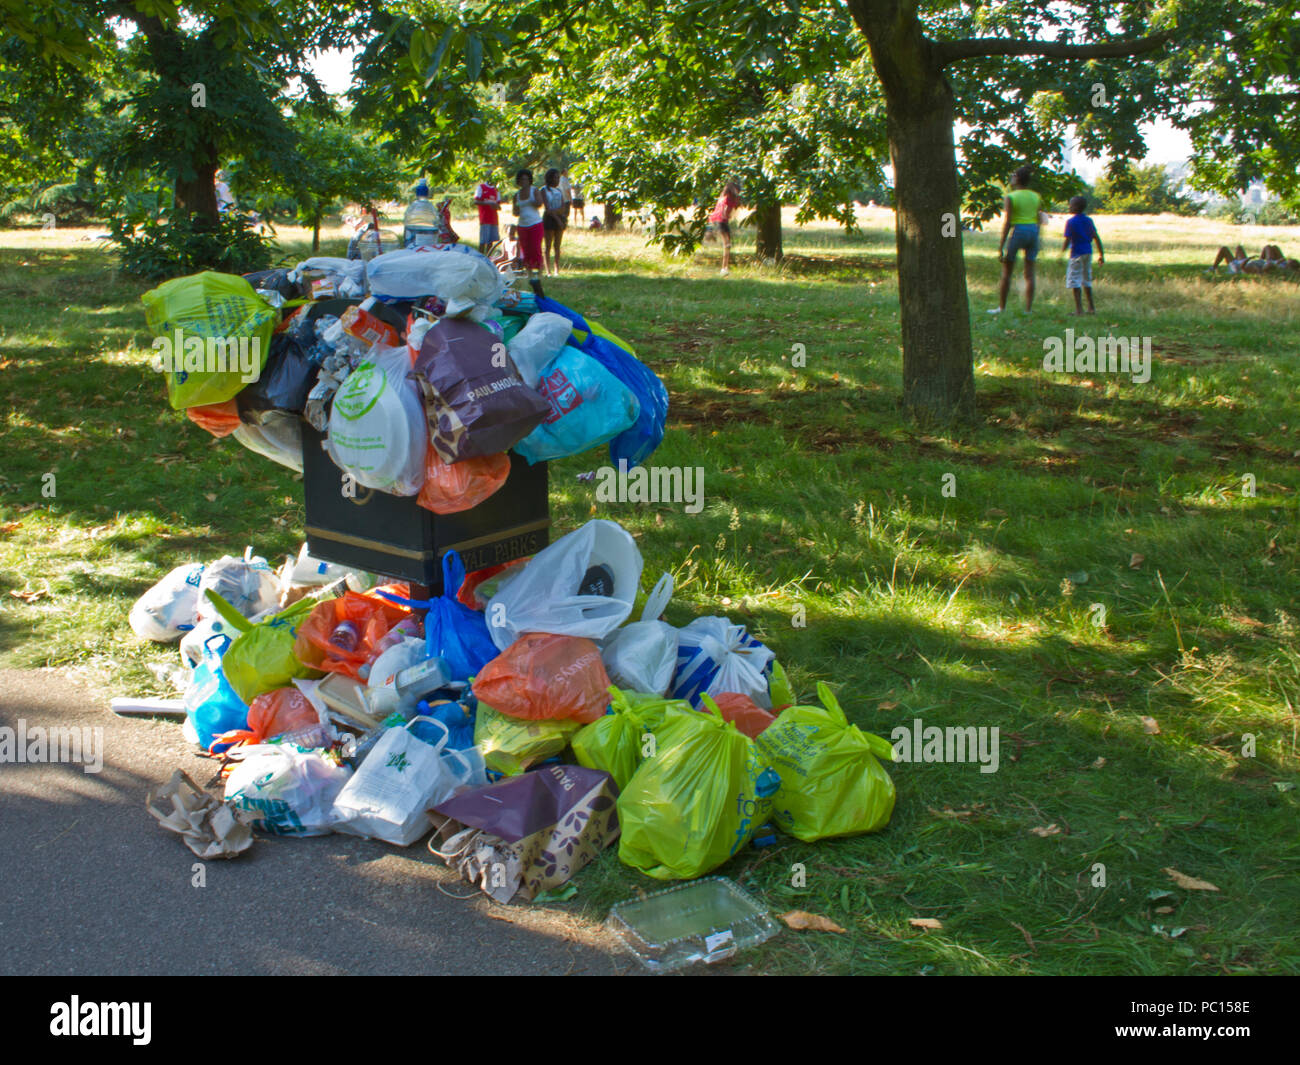 Rubbish bin overflowing in a park, people in background Stock Photo